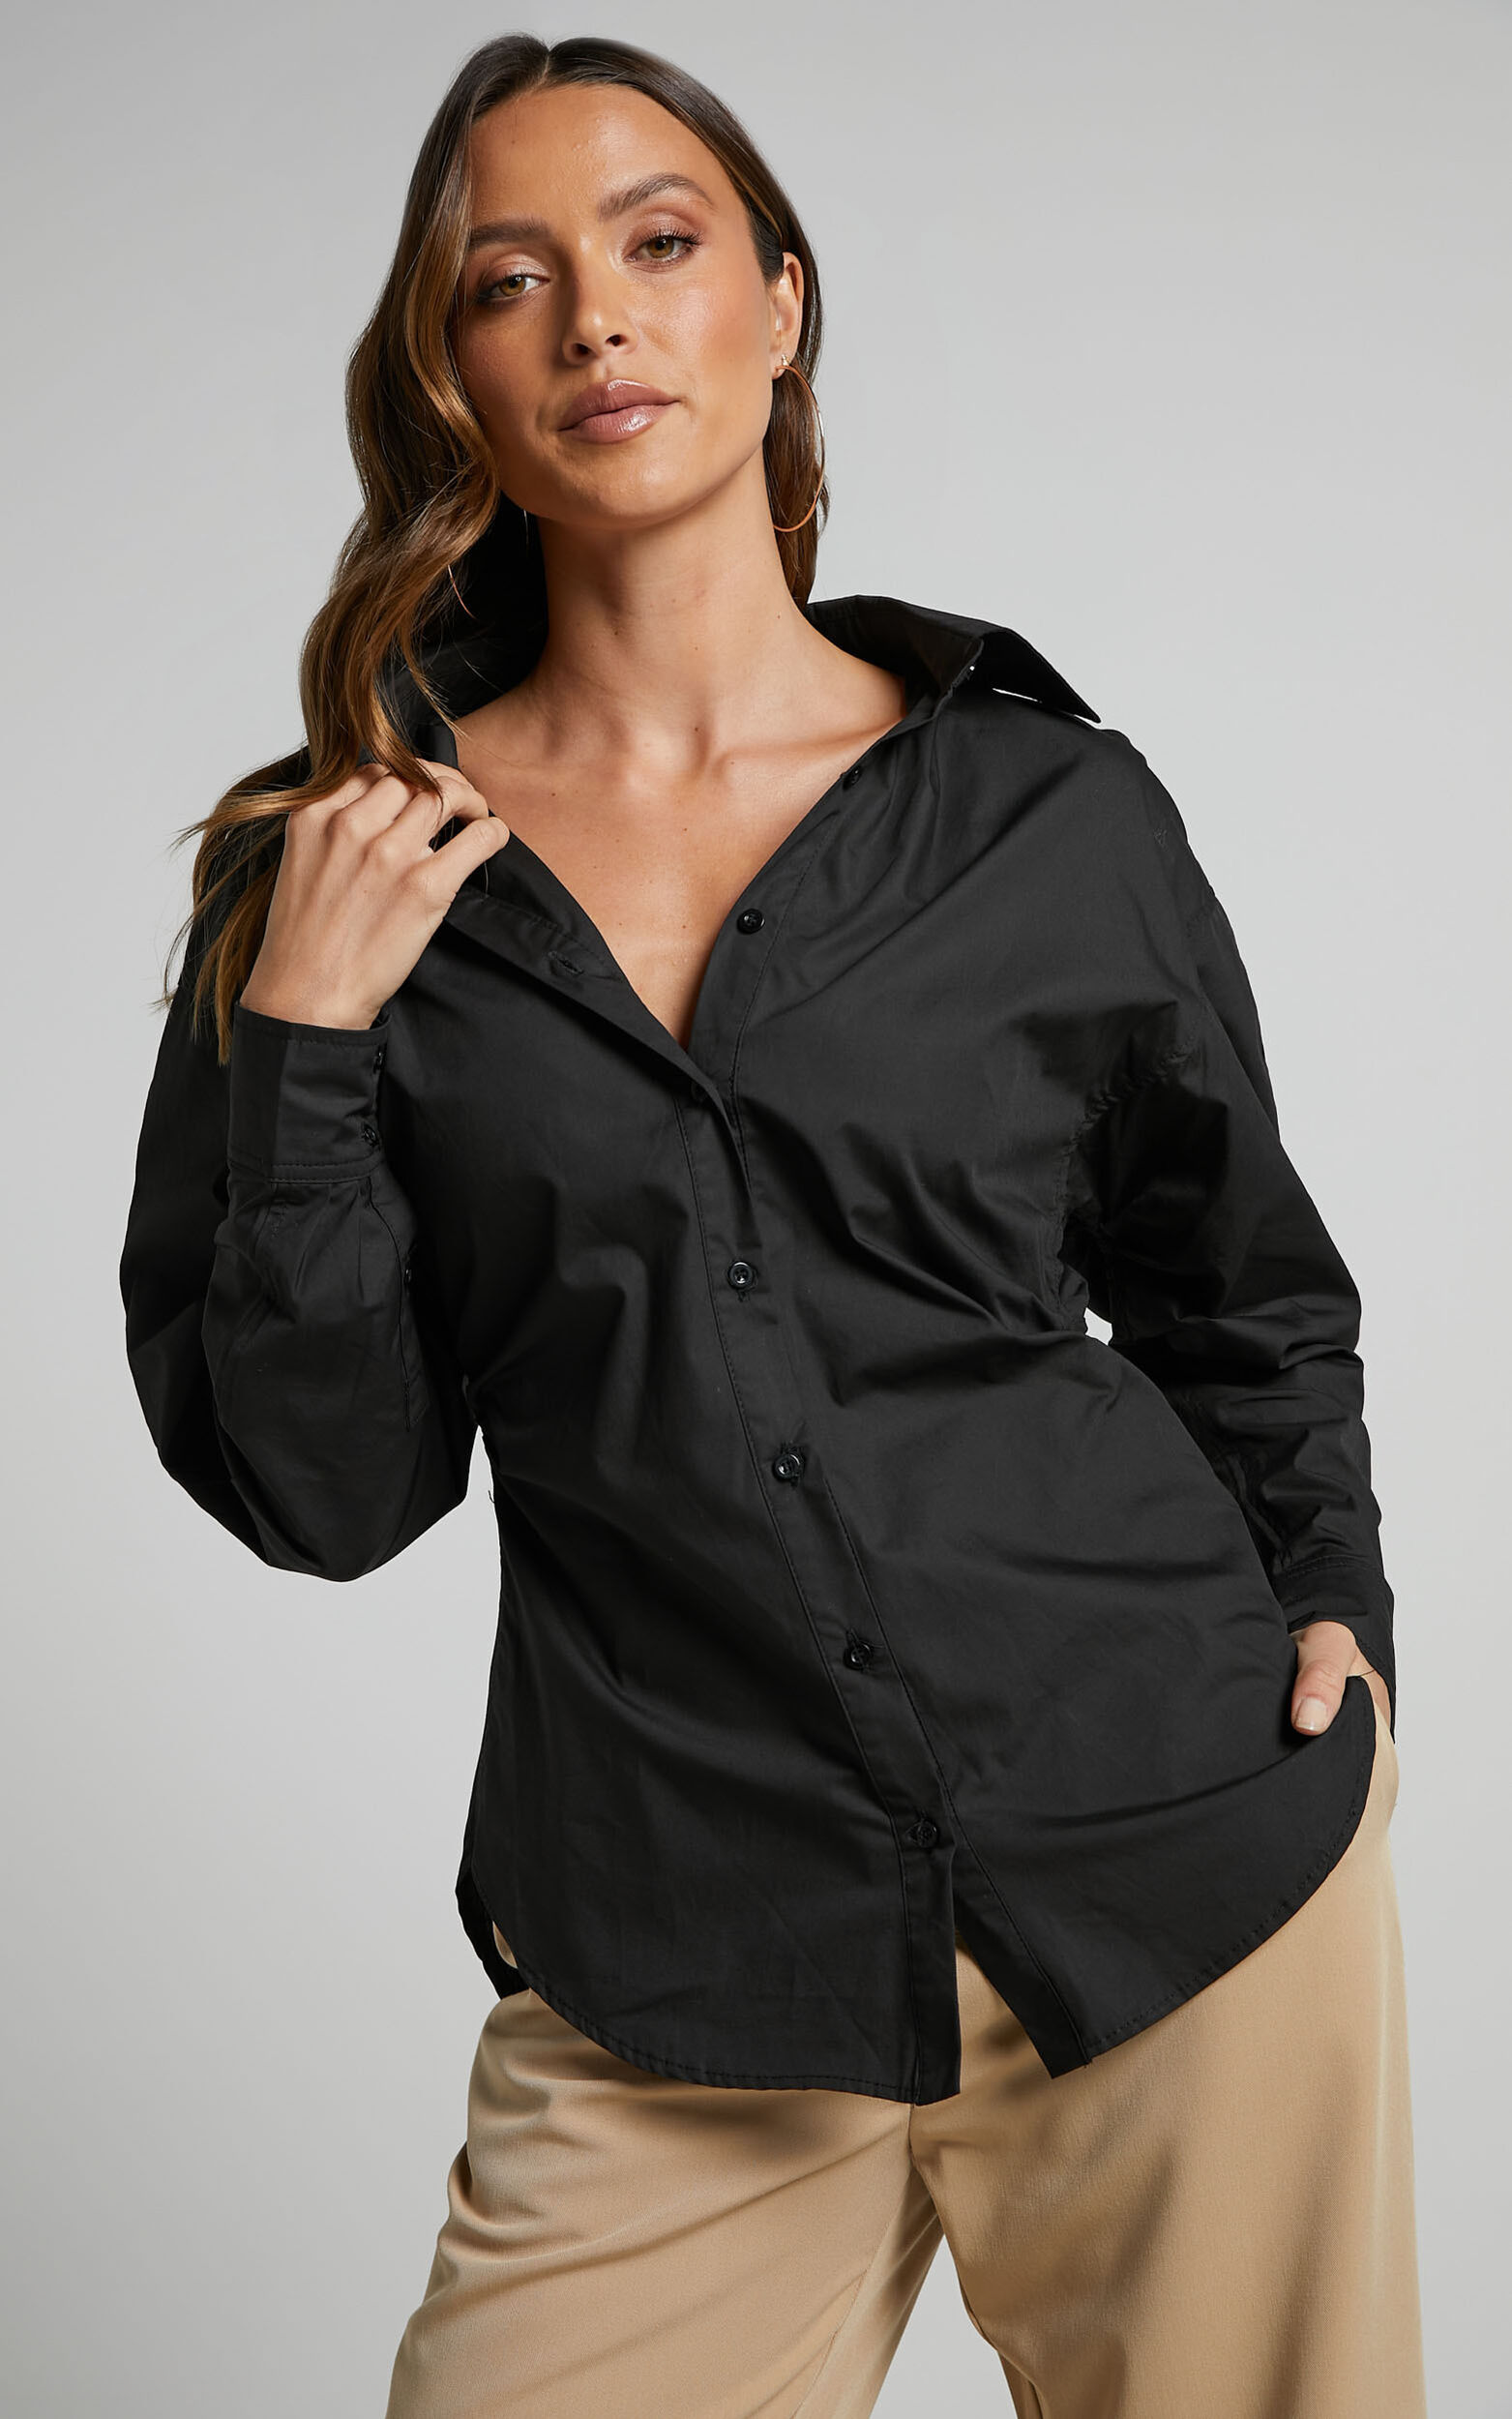 Tiva Shirt - Long Sleeve  Fitted Button Up Shirt in Black - 06, BLK1